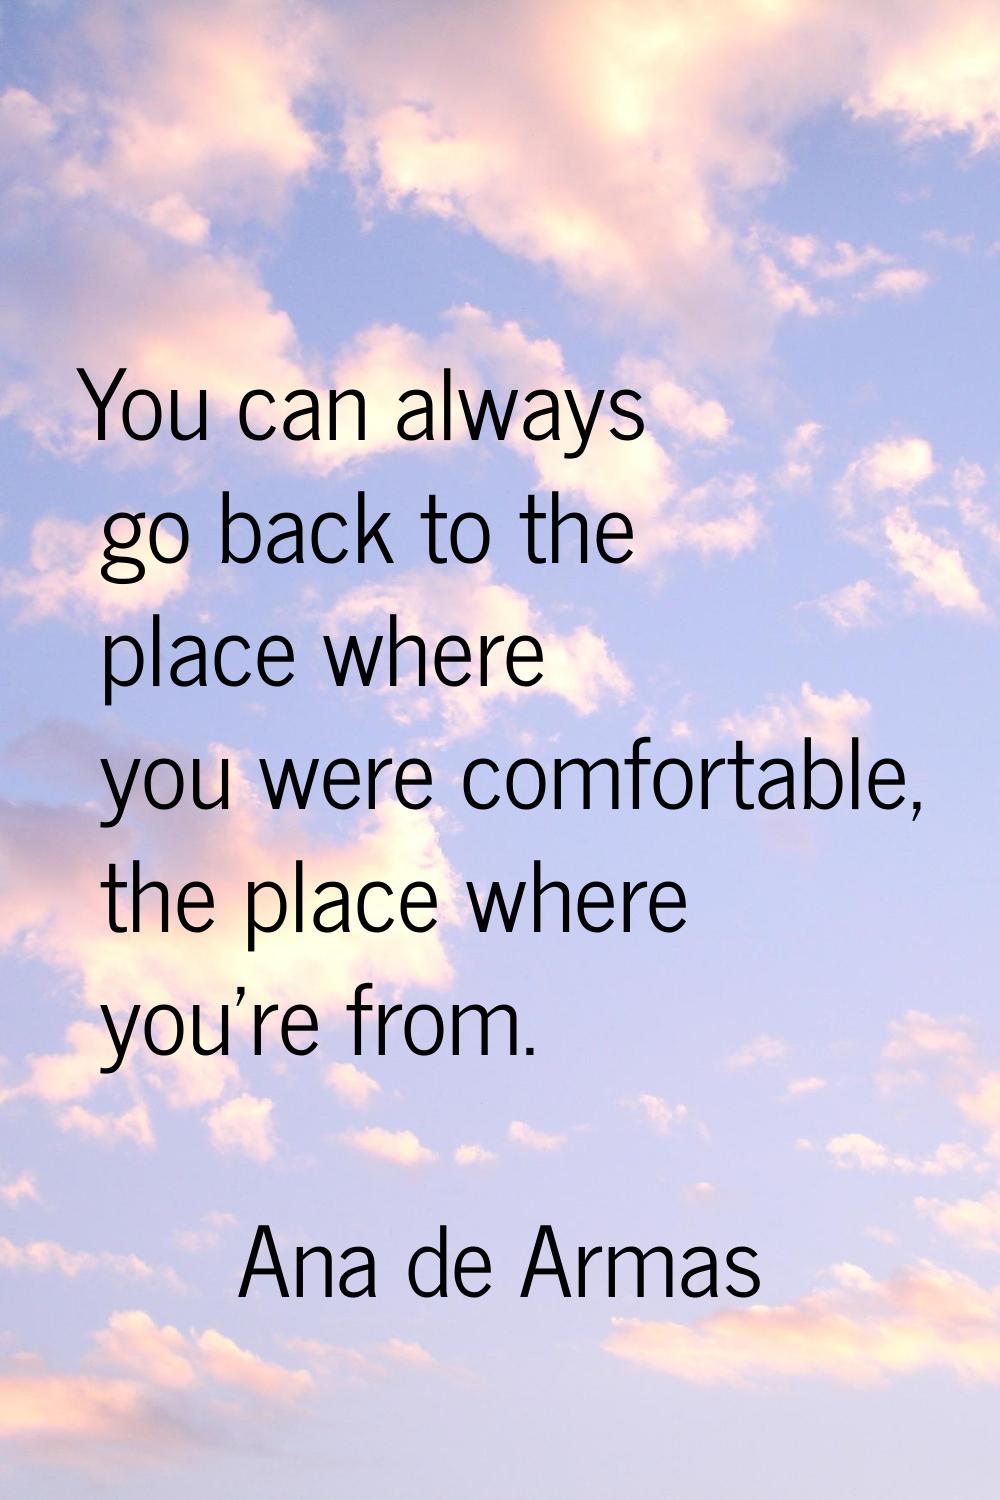 You can always go back to the place where you were comfortable, the place where you're from.